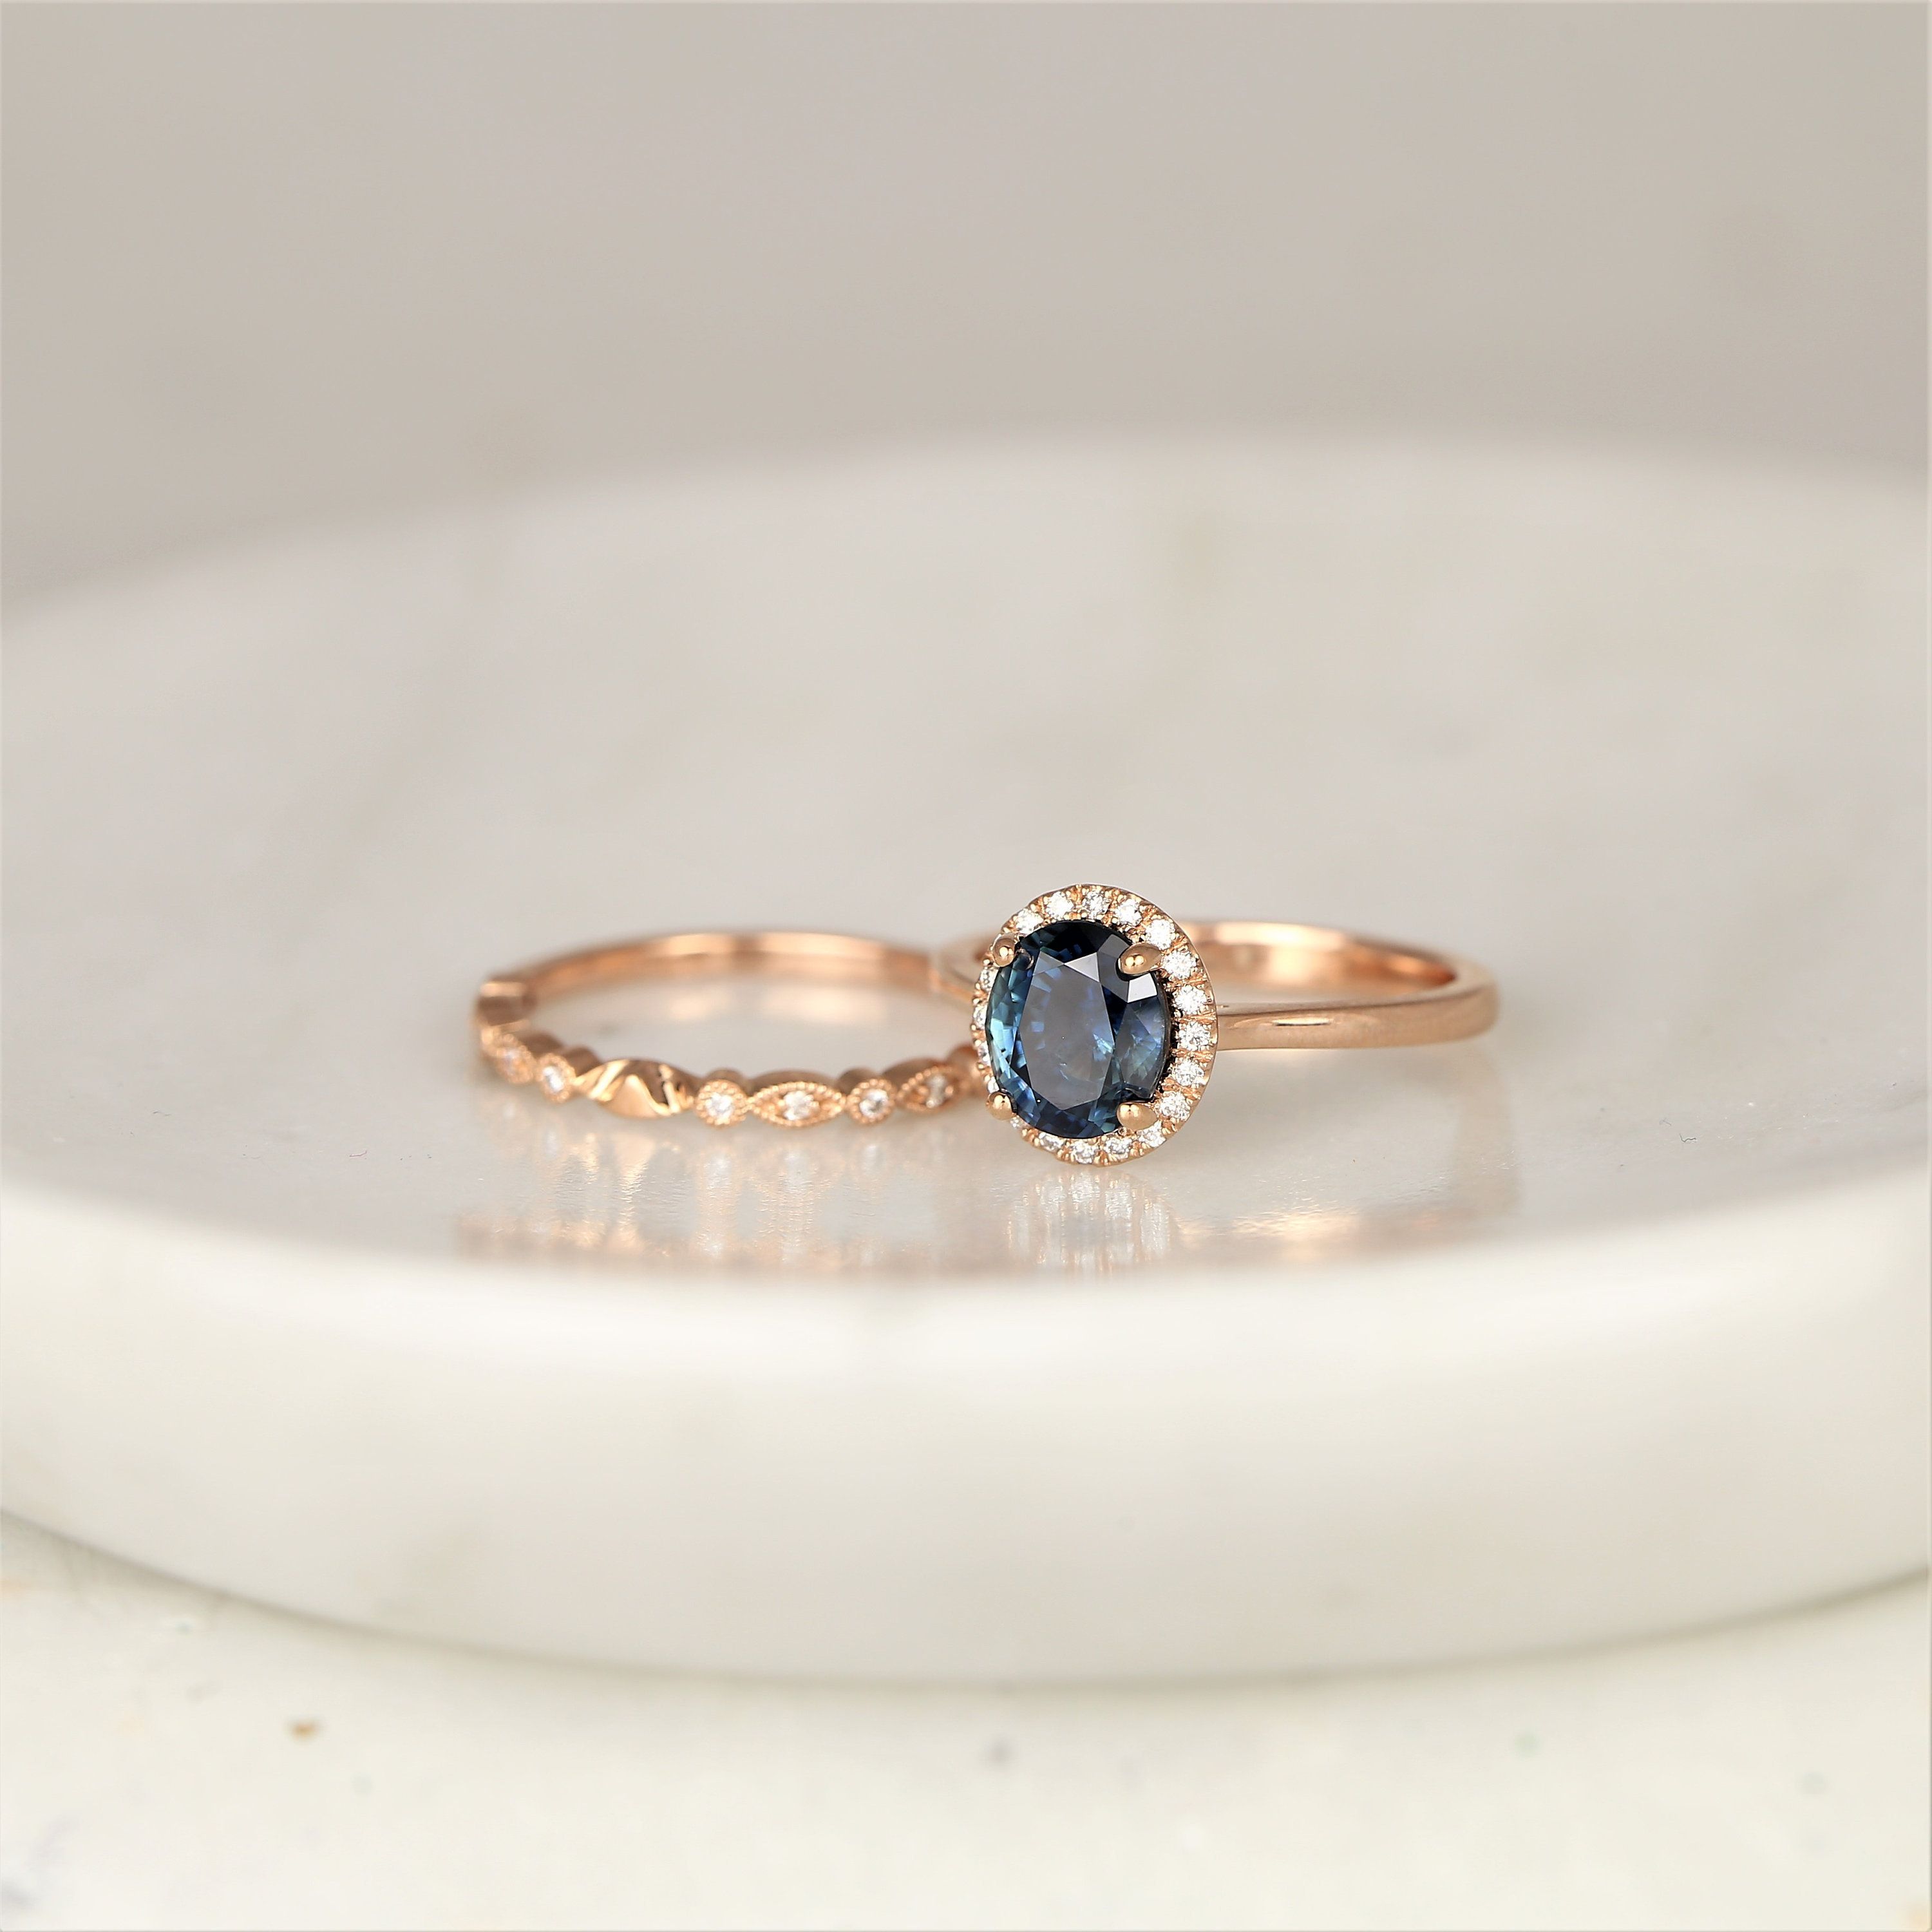 2.33ct Ready to Ship Molly & Gwen 14kt Rose Gold Ocean Blue Teal Sapphire Diamond Art Deco Oval Halo Bridal Set by Rosados Box